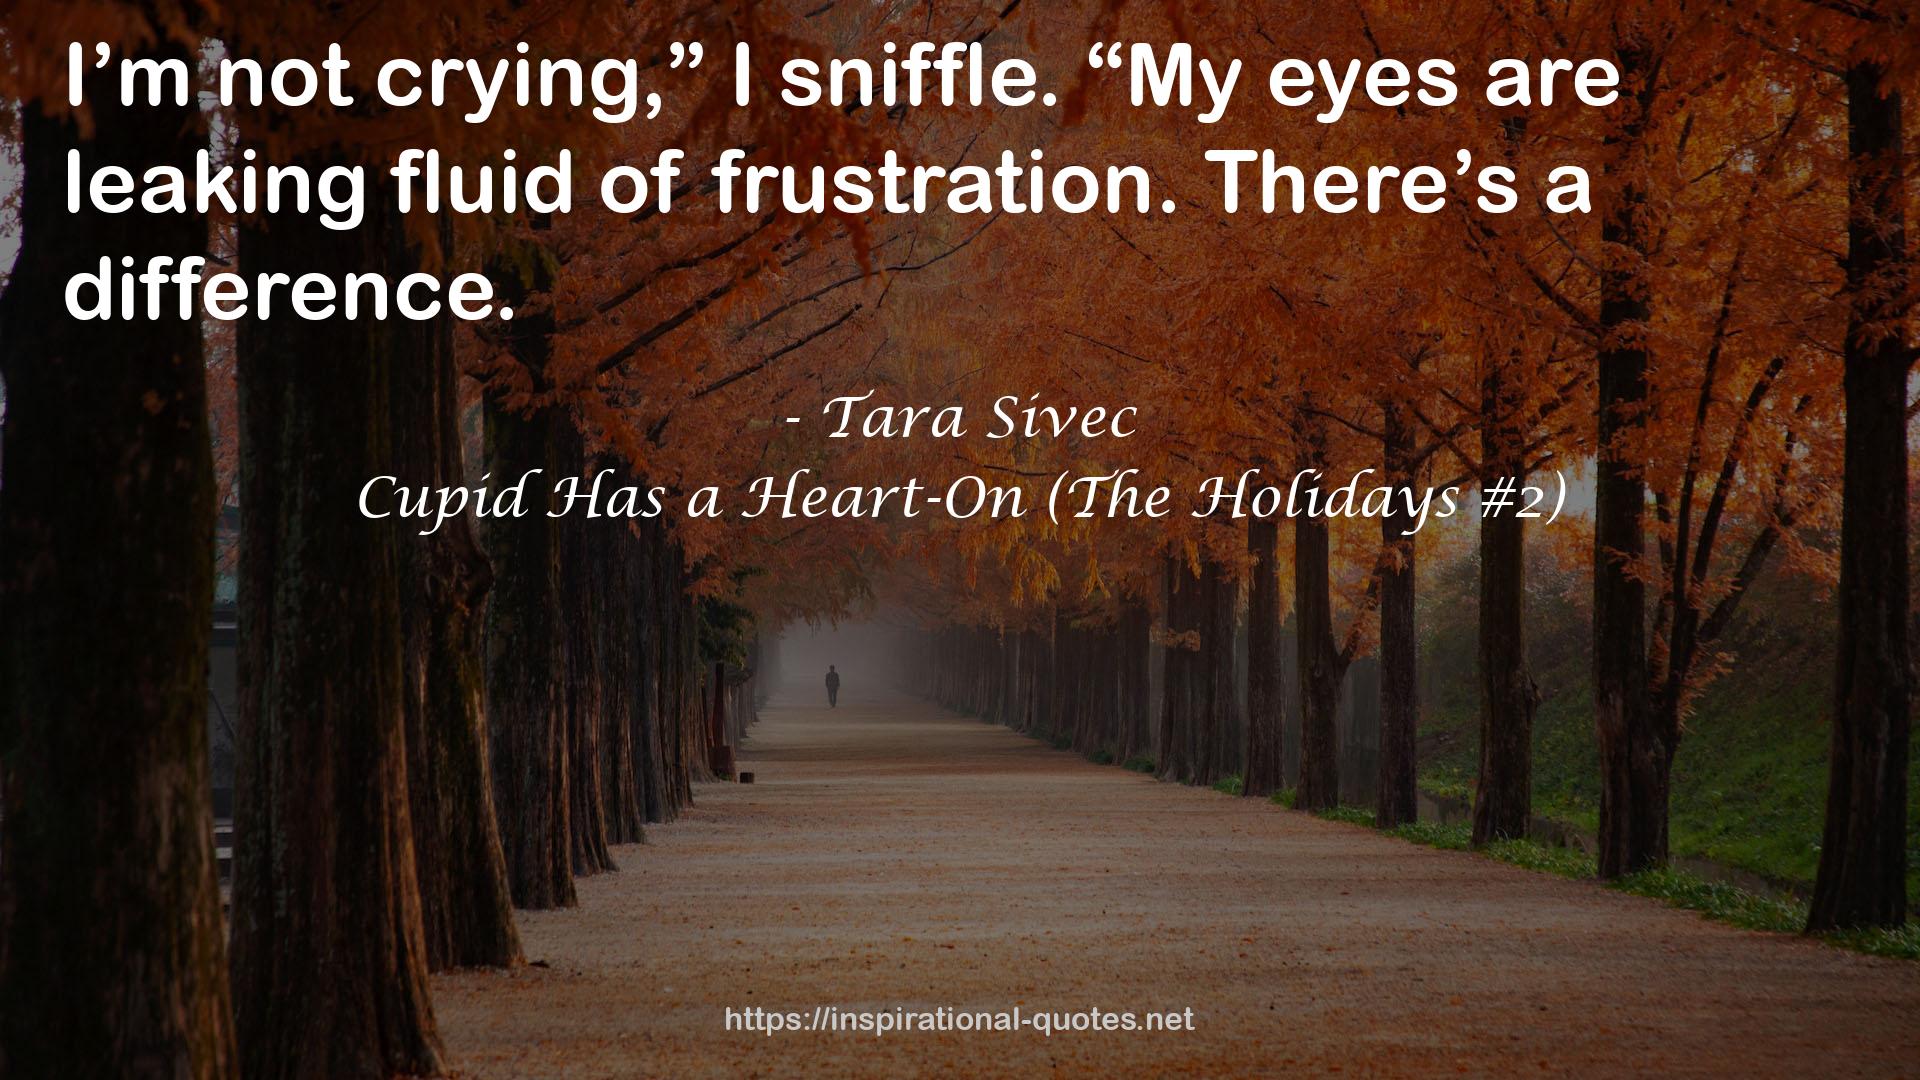 Cupid Has a Heart-On (The Holidays #2) QUOTES